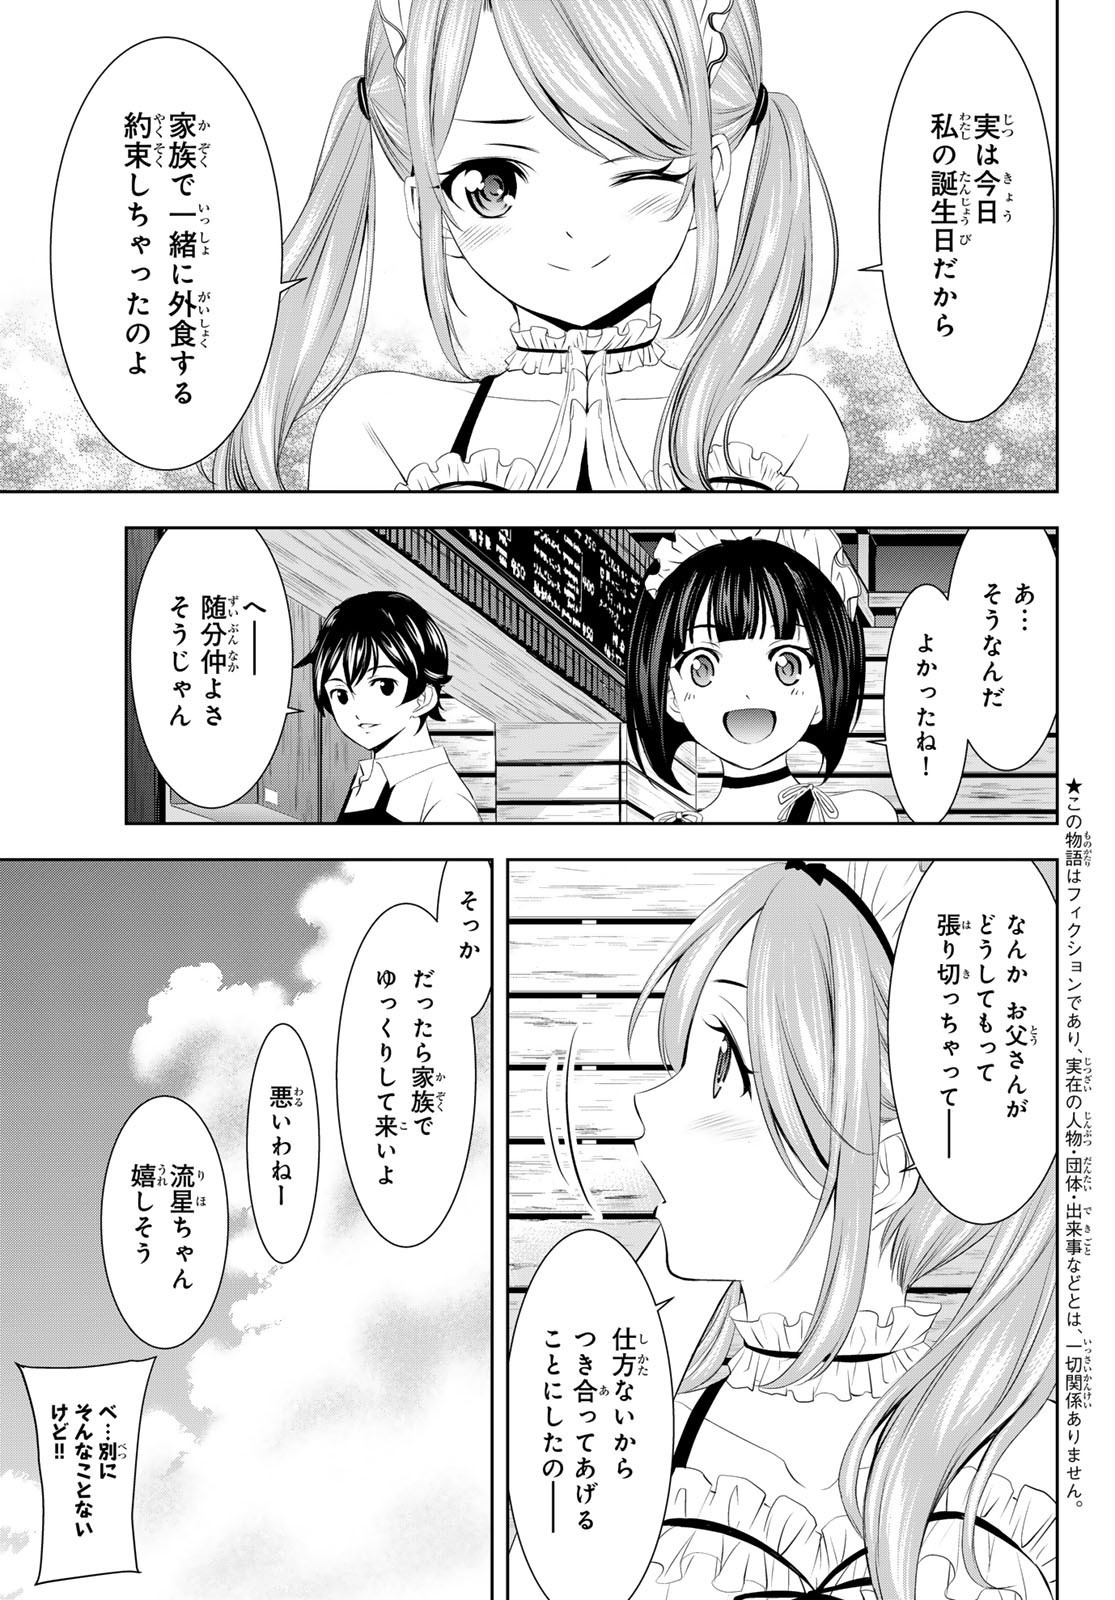 Goddess-Cafe-Terrace - Chapter 148 - Page 3